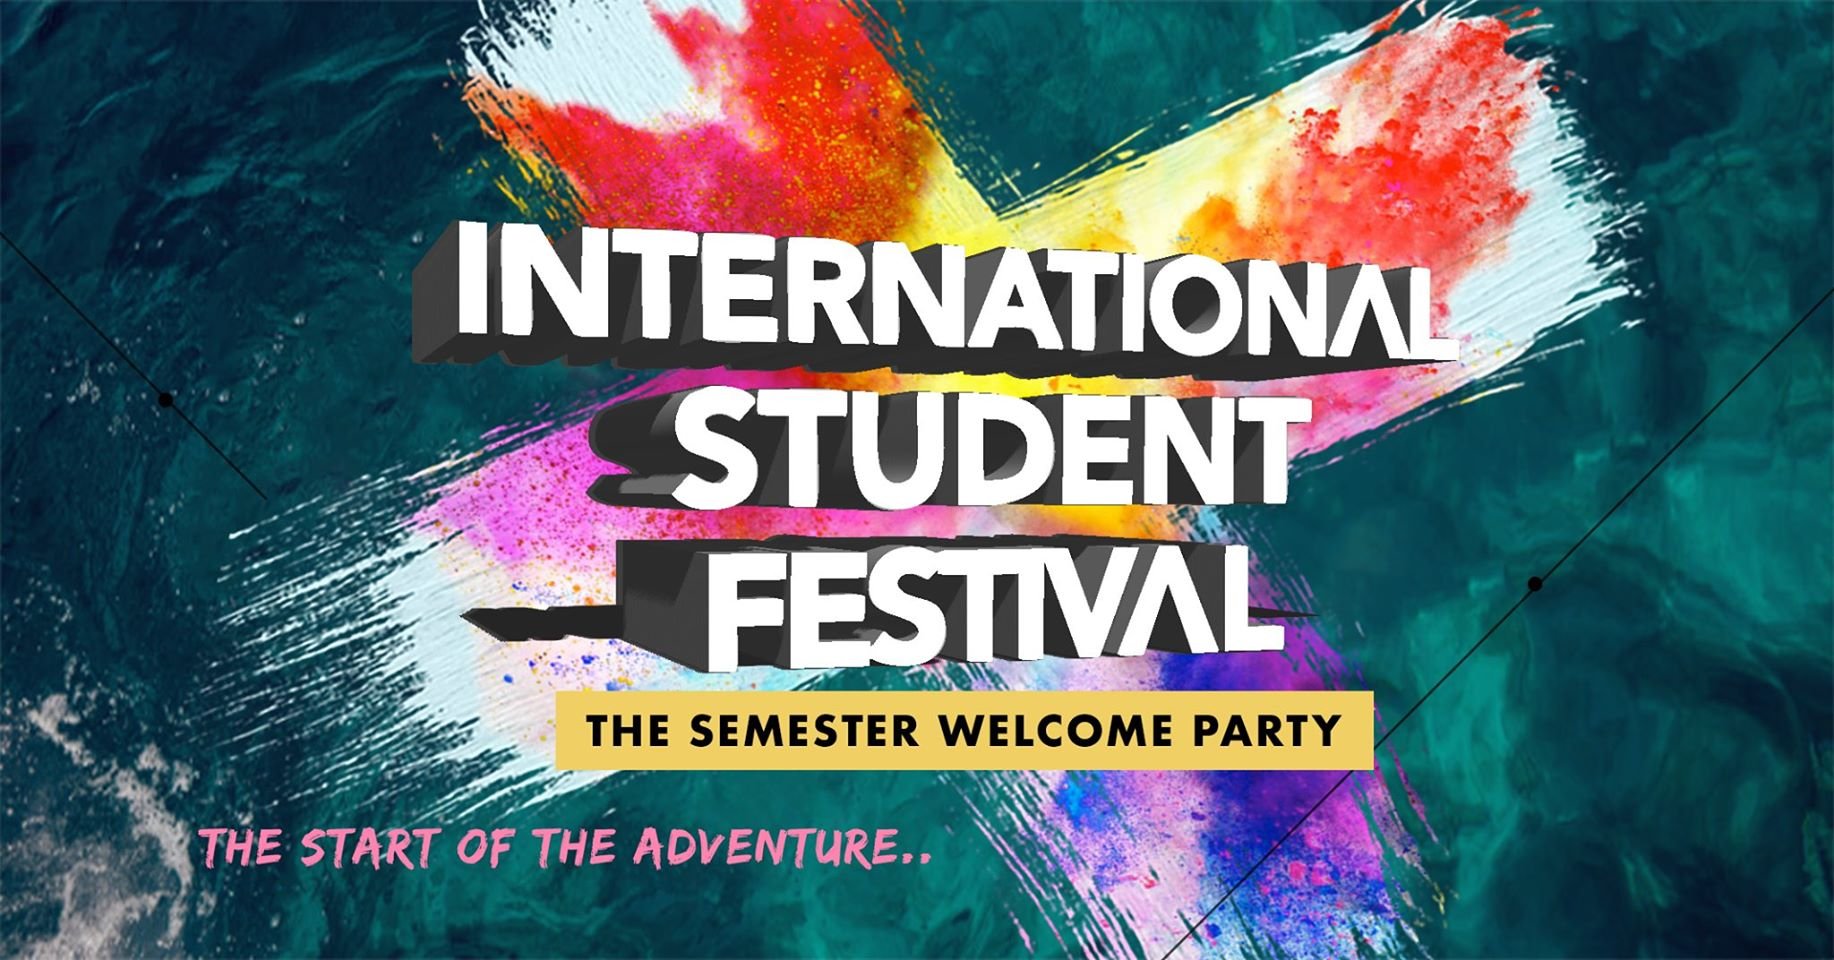 International Student Festival | Events, Things to do | EVENTLAND